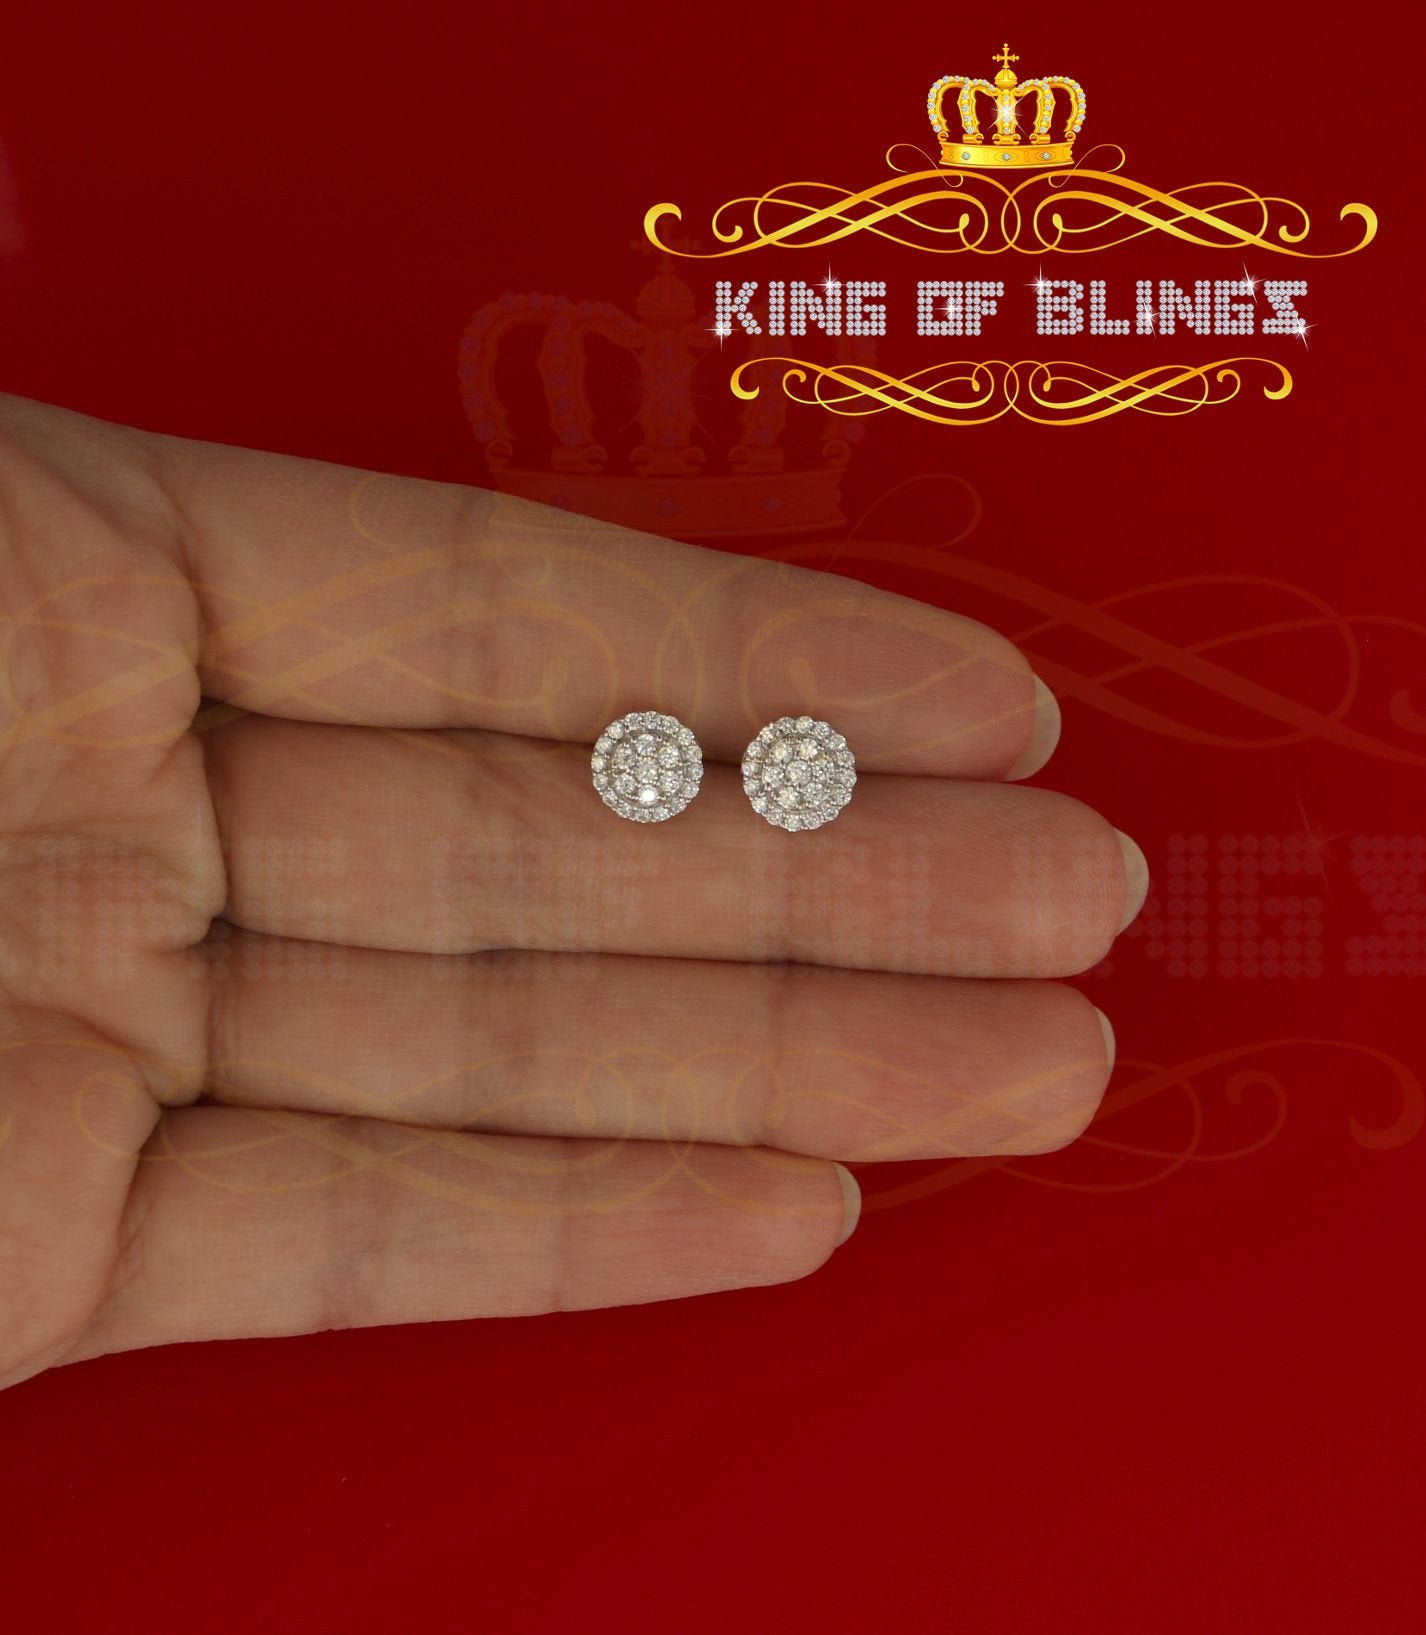 King of Blings- Aretes Para Hombre 925 White Silver 0.88ct Cubic Zirconia Round Women's Earring KING OF BLINGS